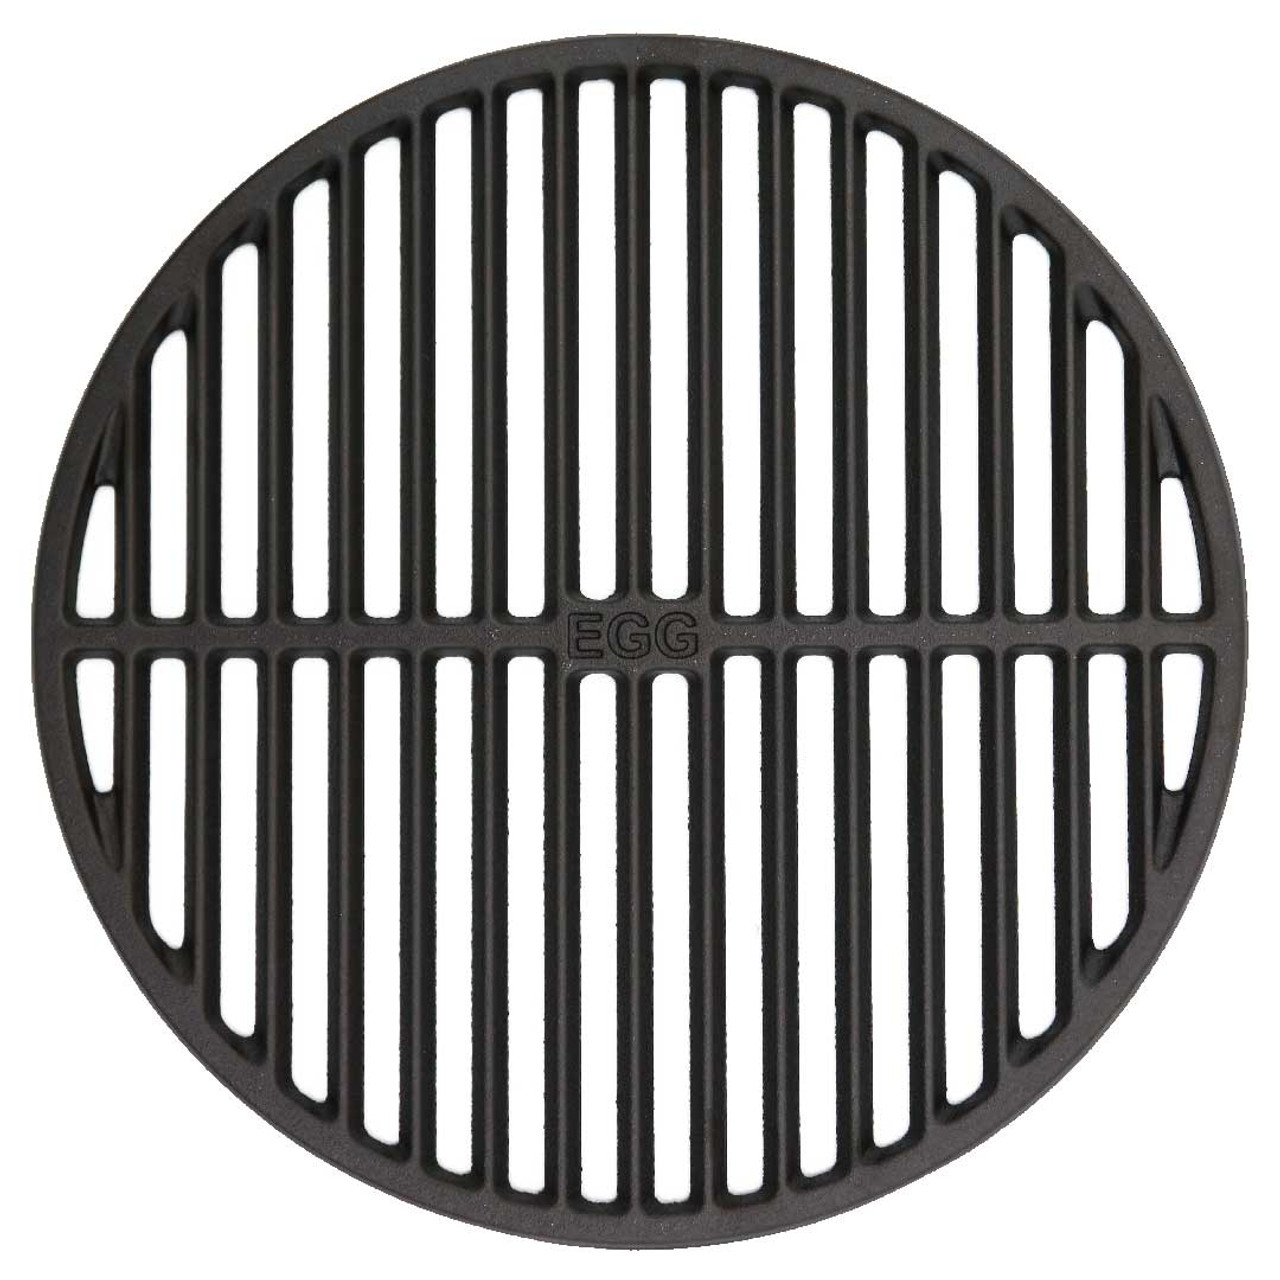 https://cdn11.bigcommerce.com/s-xj9col3syn/images/stencil/1280x1280/products/451/1846/cast-iron-13inch-round-cooking-grid-126405-2O6B2832__37678.1672262826.jpg?c=2